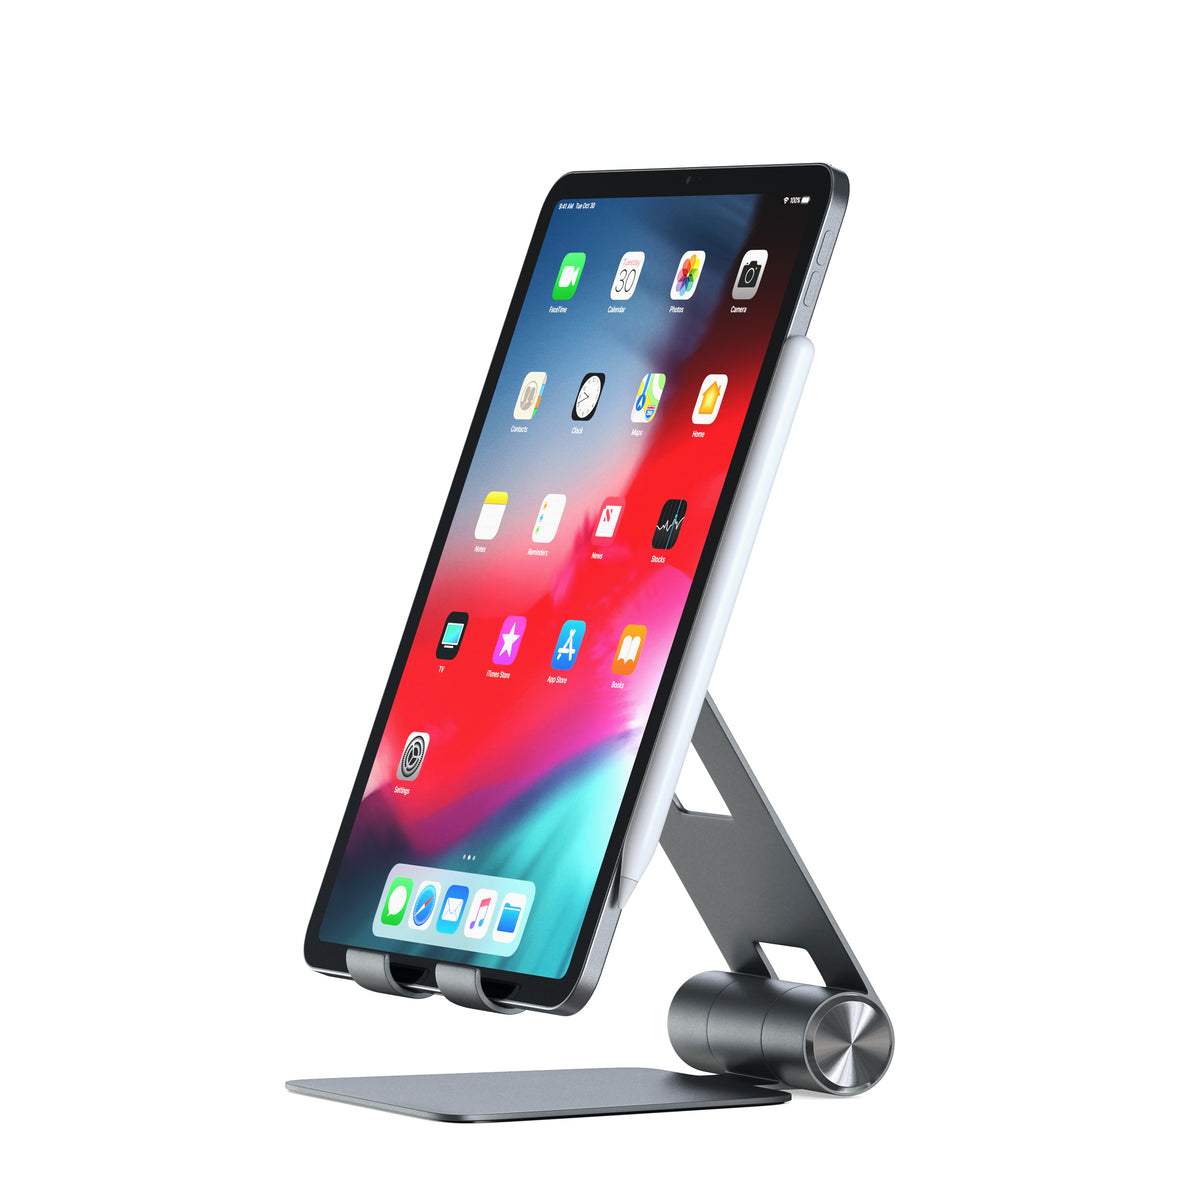 SATECHI R1 Aluminum Multi-Angle Foldable Tablet &amp; Phone Stand - Space Grey